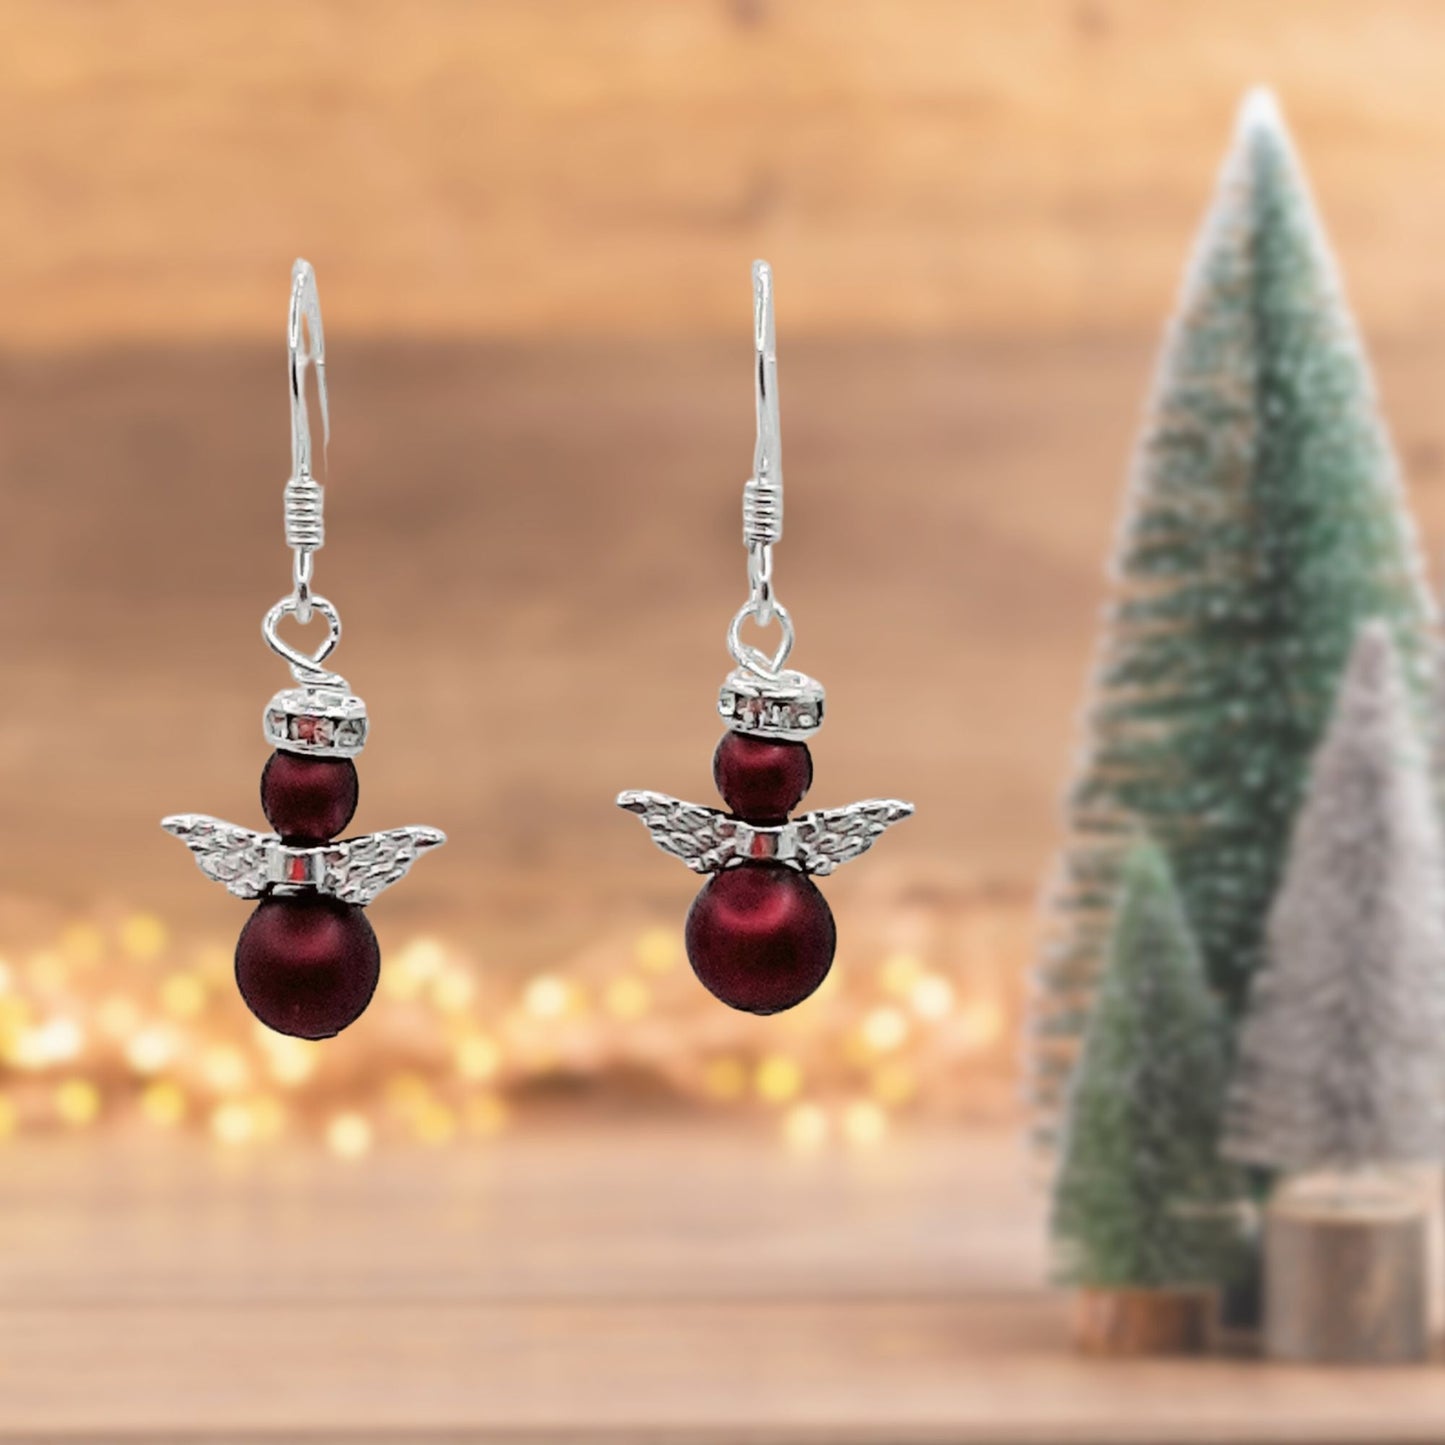 Pair of angel earrings made with burgundy pearls and incorporating angel wings and a crystal halo. Hung from sterling silver ear wires.